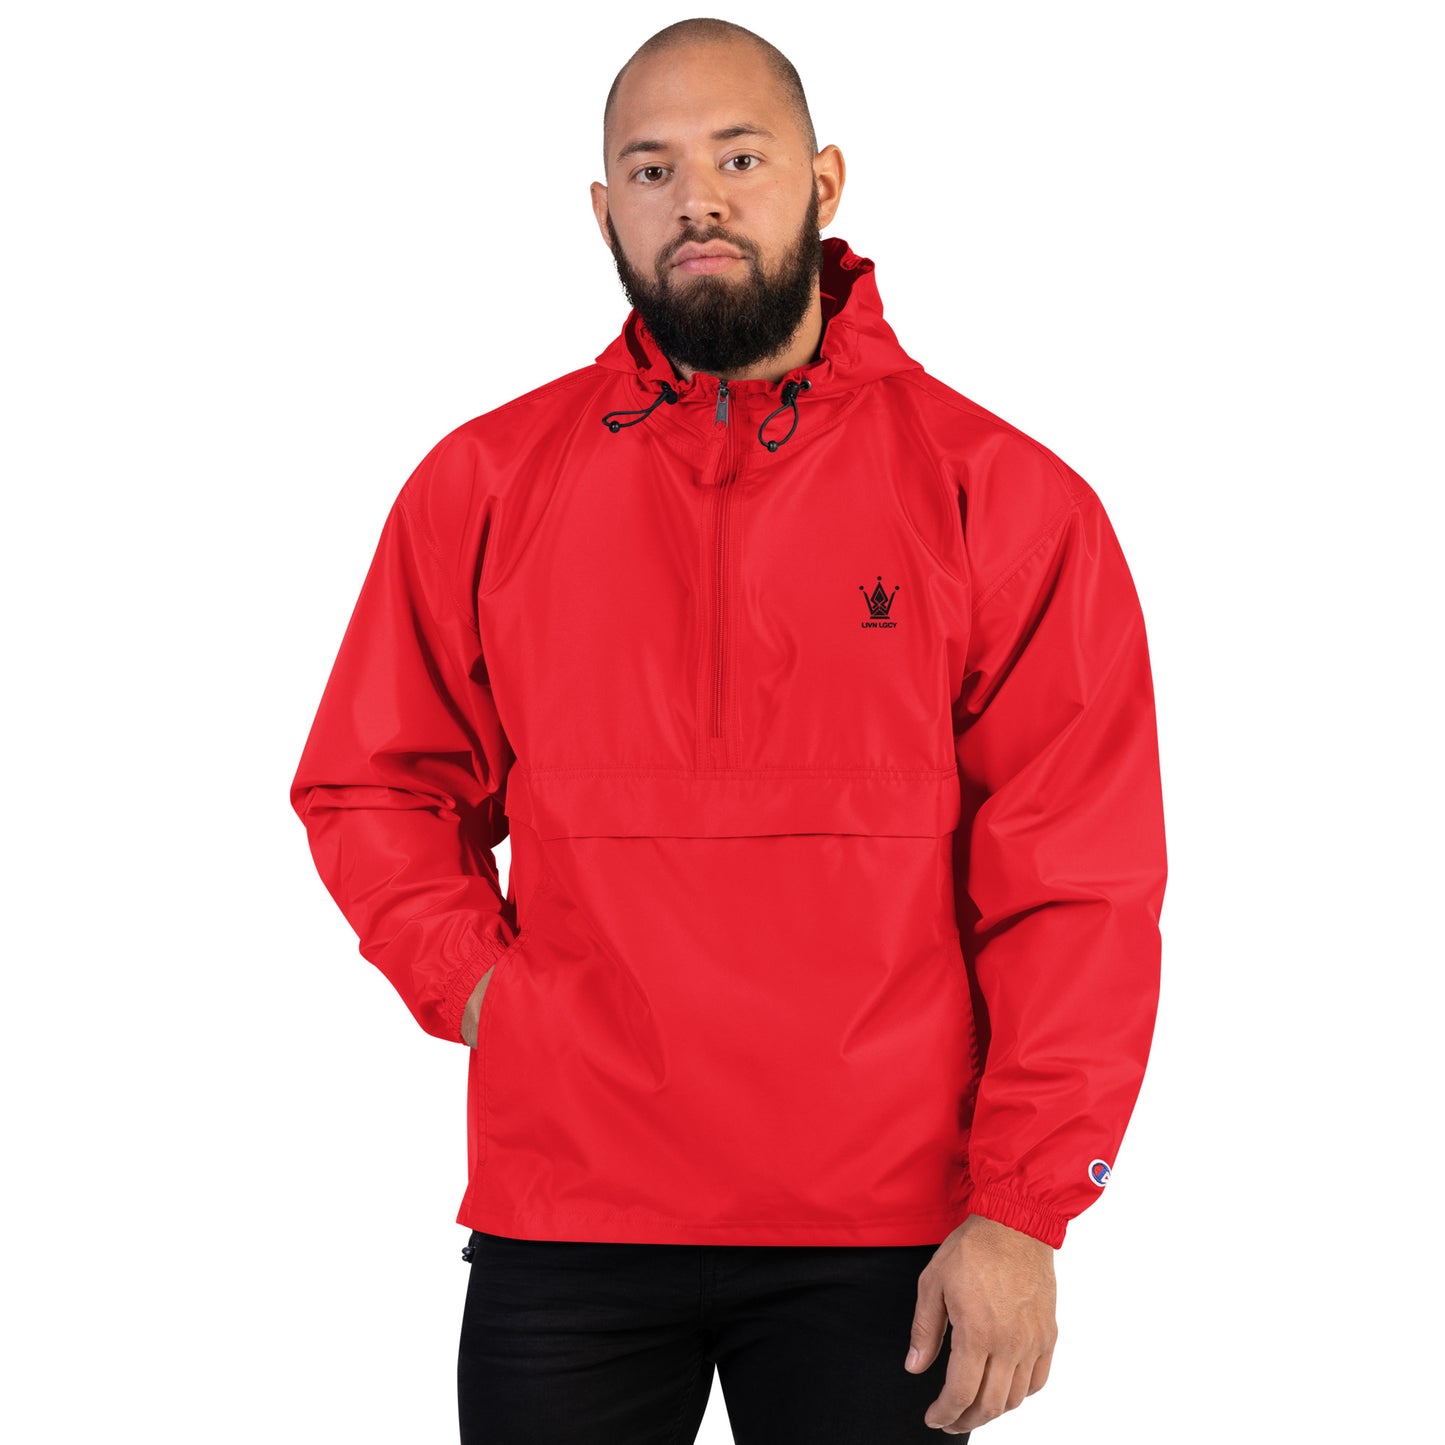 Embroidered Gradient Ruby Red Emblem Champion Packable Jacket